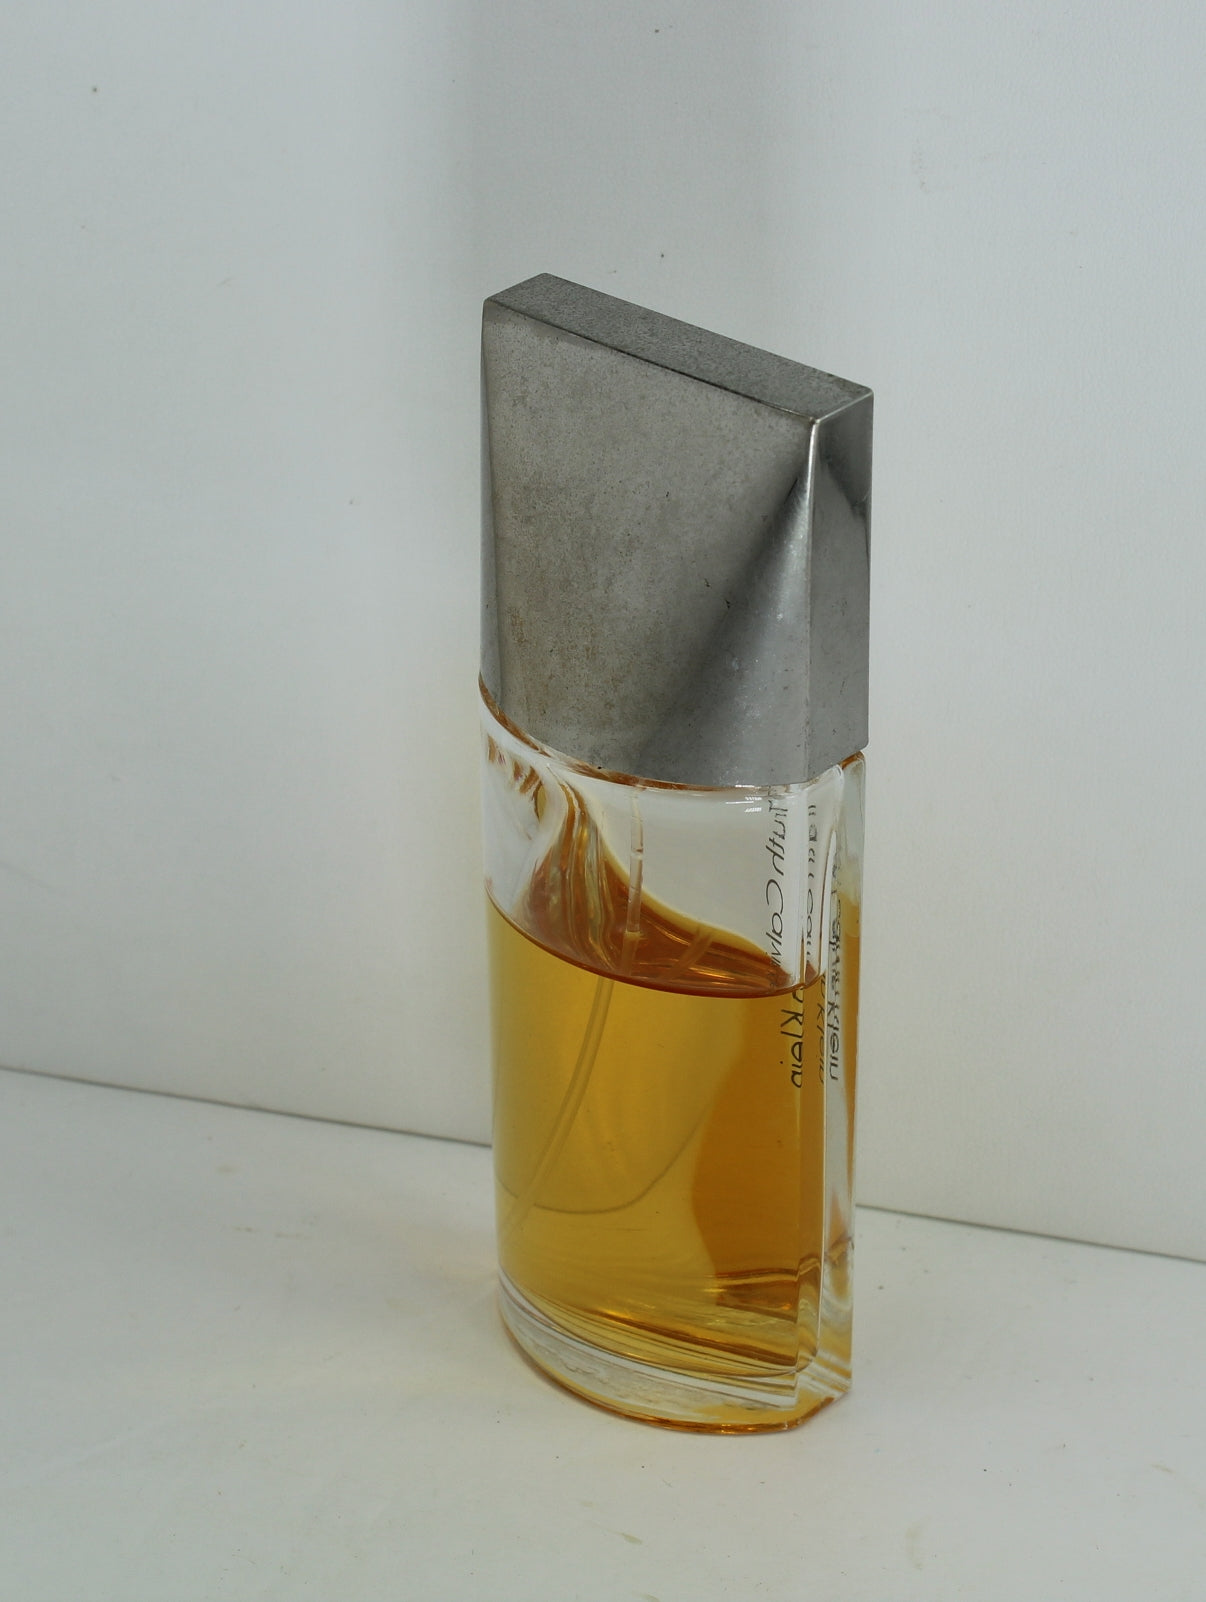 Truth Calvin Klein 1.7 Spray EDP Partial Bottle Glas Silver Top missing top price reduced